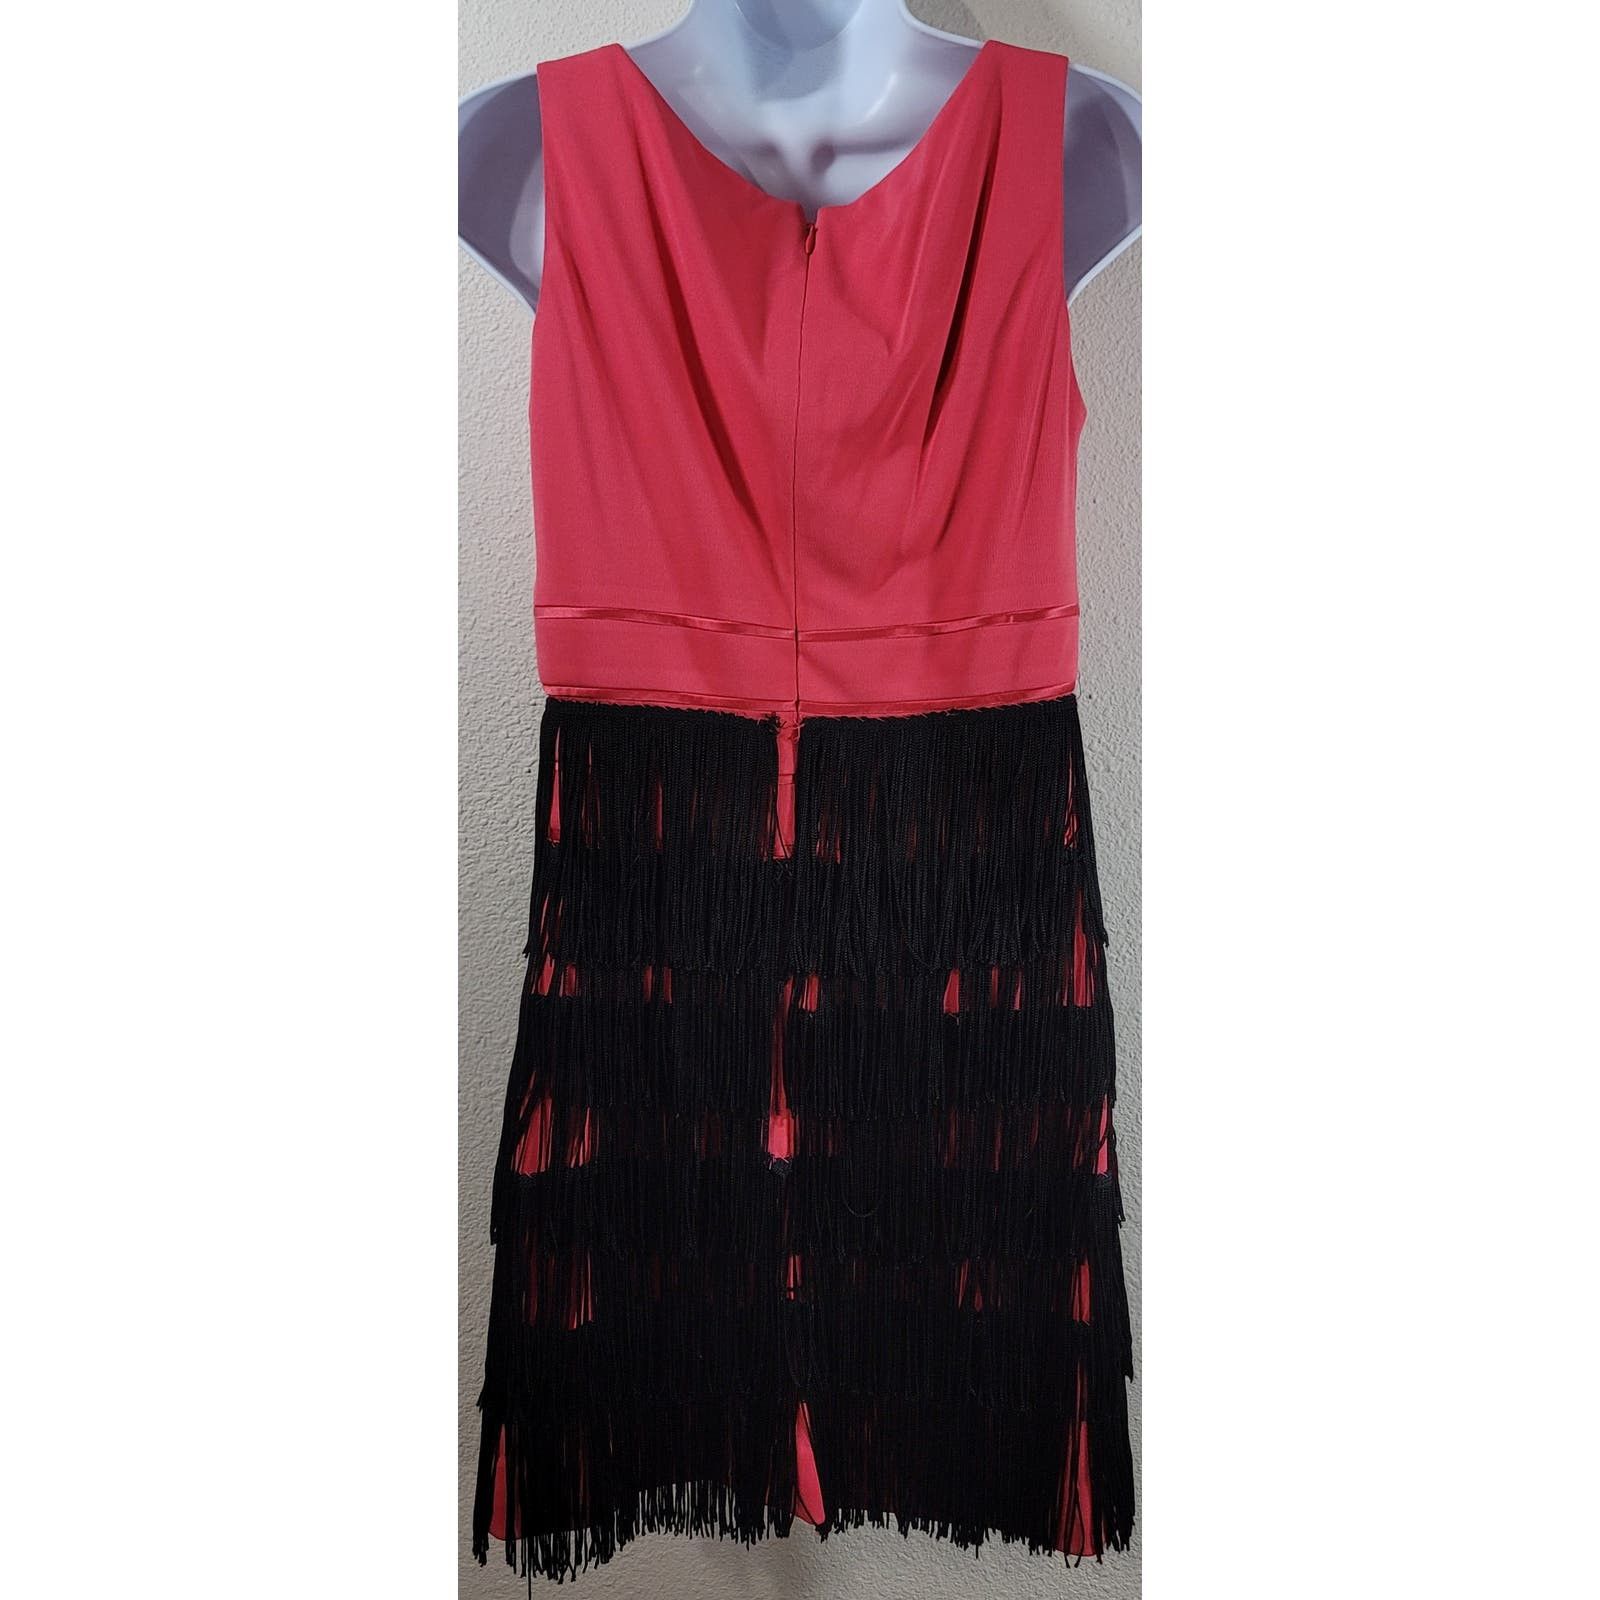 Other Kay Unger Coral Crisscross Bodice Fringe Skirt Dress 6 Size M / US 6-8 / IT 42-44 - 2 Preview